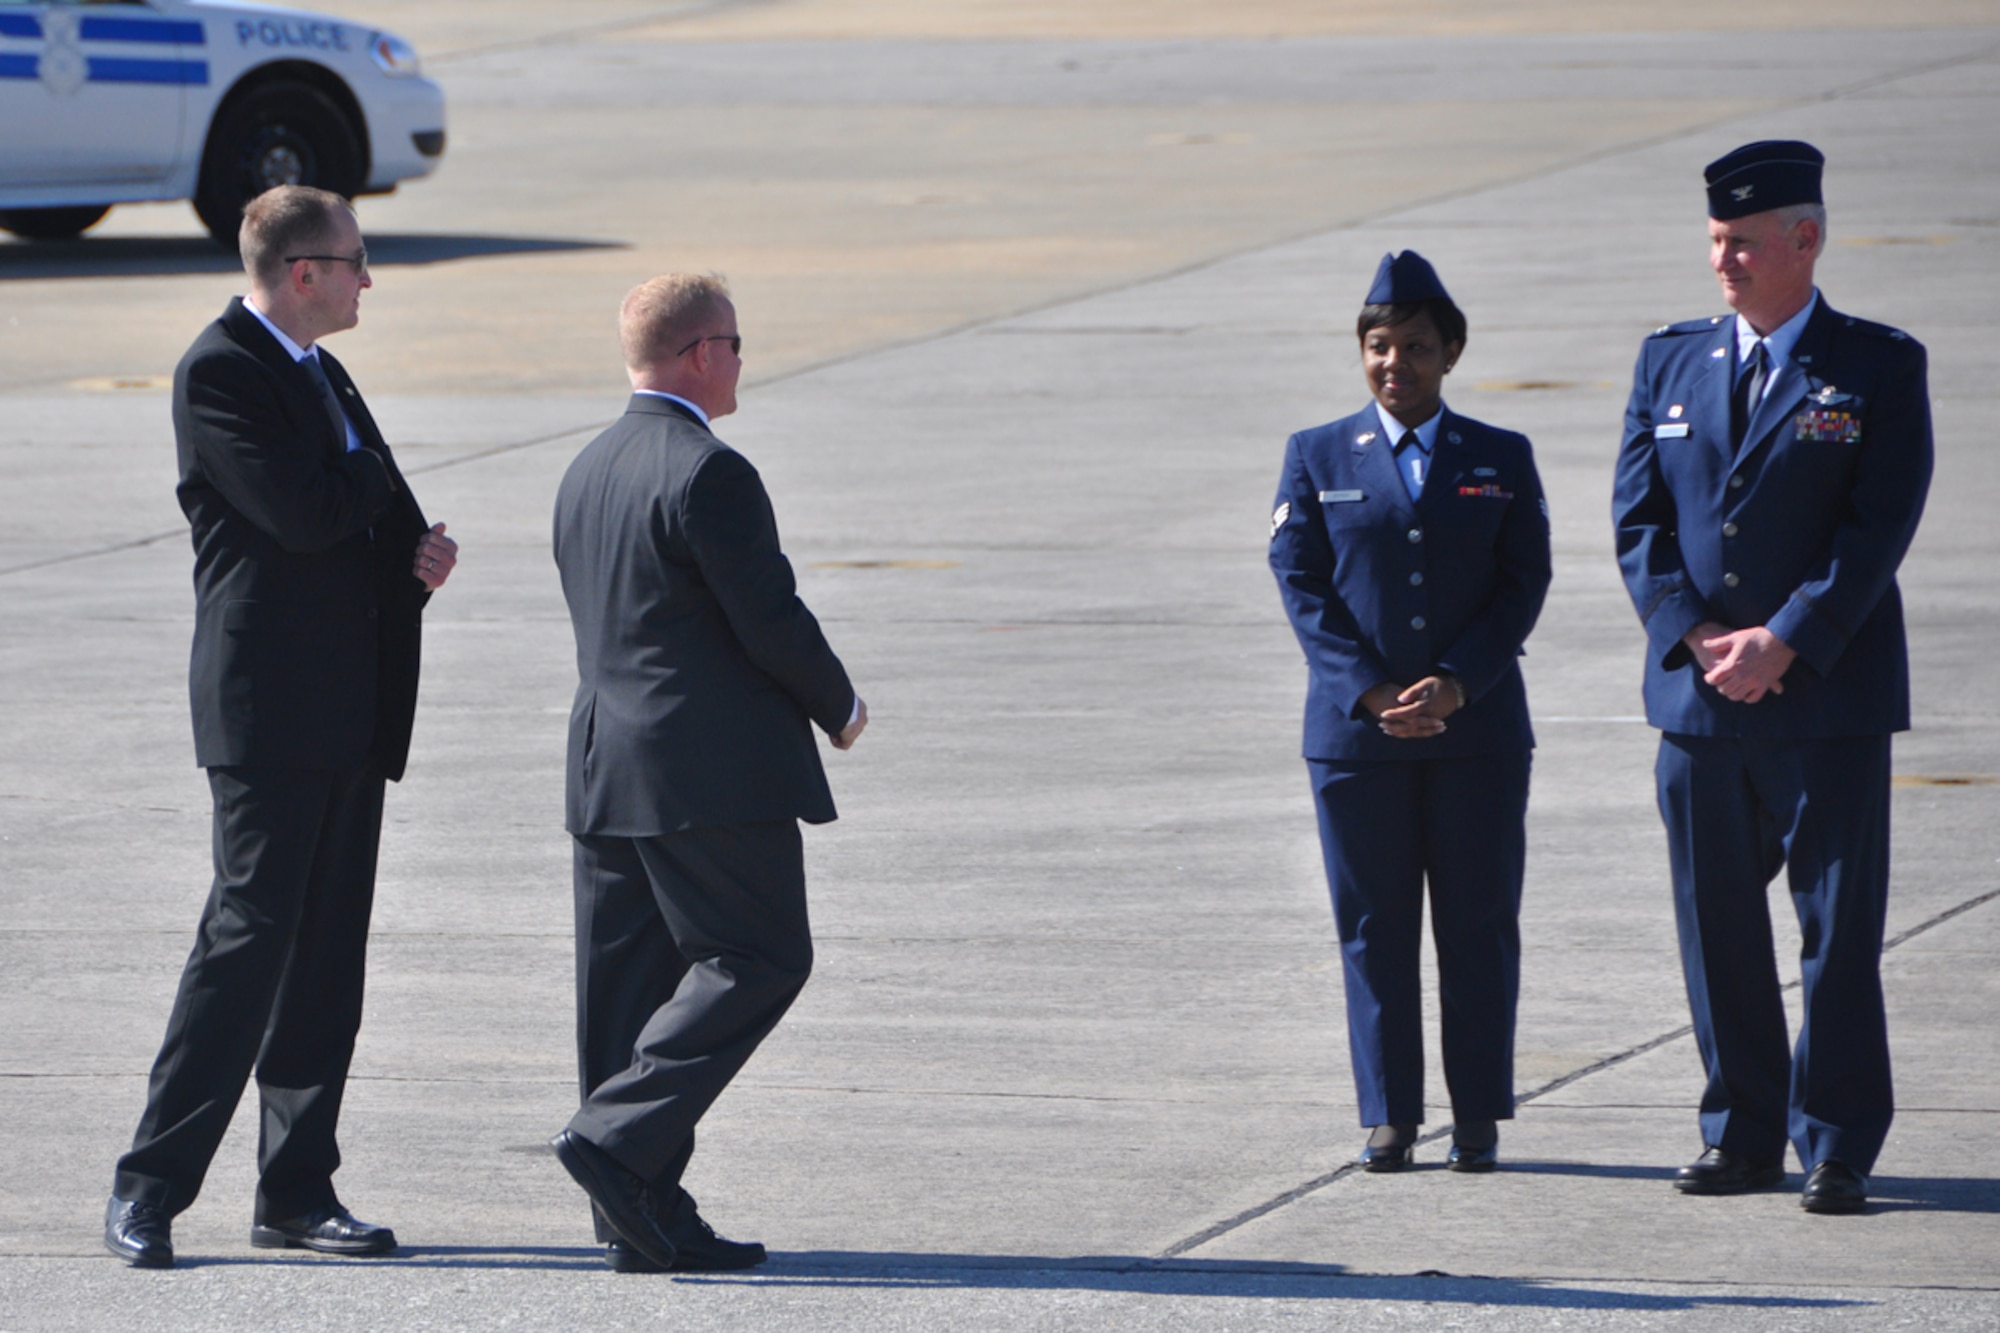 White House staff members meet with Col. Steven R. Clayton, 94th Operations Group commander and Senior Airman Tumyra D. Byron, knowledge management specialist, after greeting the President Barack Obama during his visit to Dobbins Air Reserve Base, Feb. 14. The president was en-route to the City of Decatur Recreation Center to discuss proposals outlined in his recent state of the union address. (U.S.Air Force photo/James Branch)